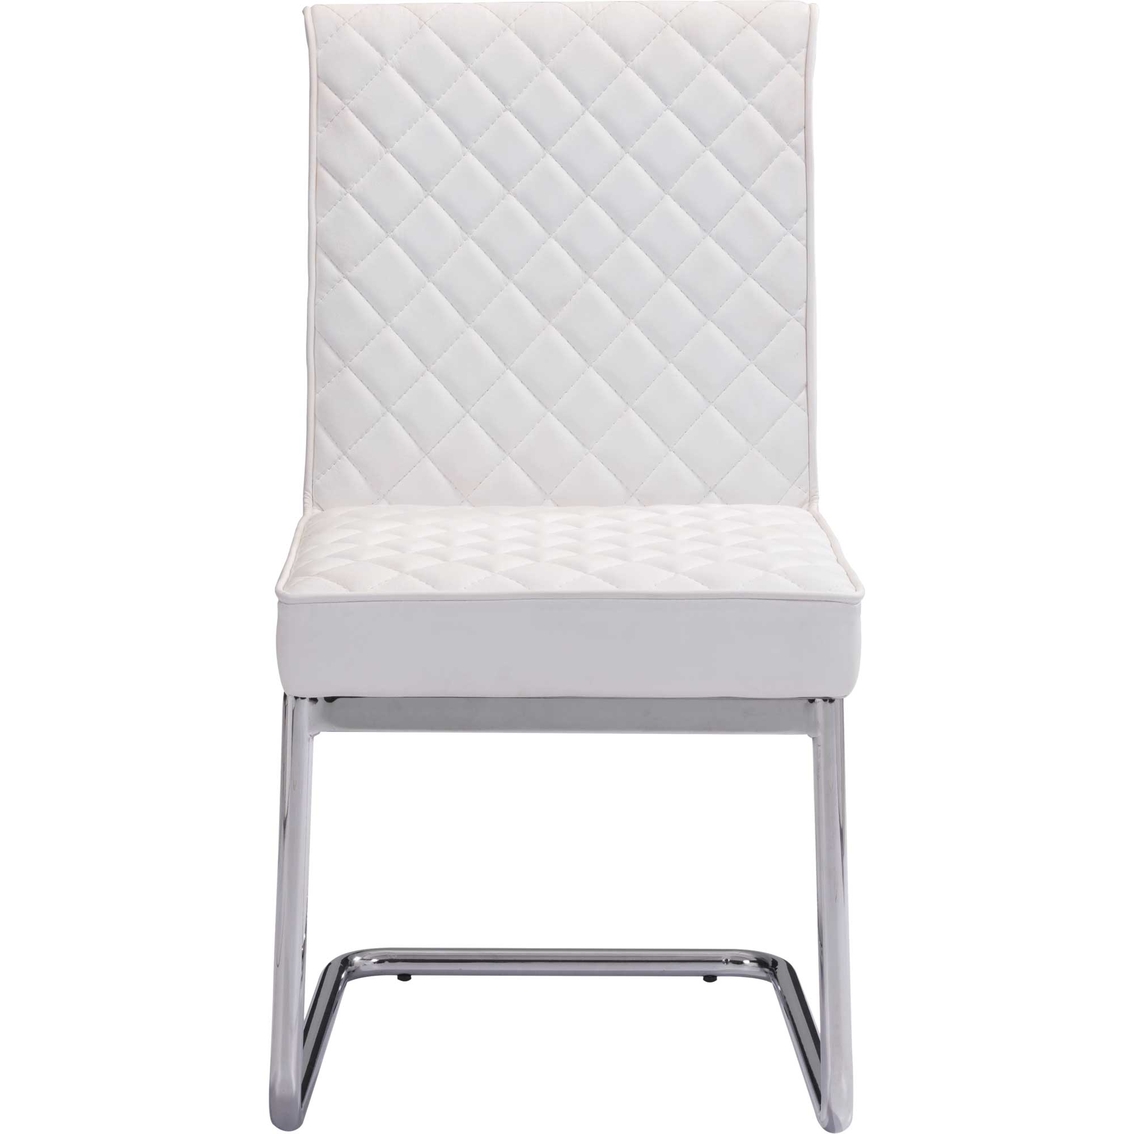 Zuo Modern Quilt Armless Dining Chair 2 Pk. - Image 3 of 8